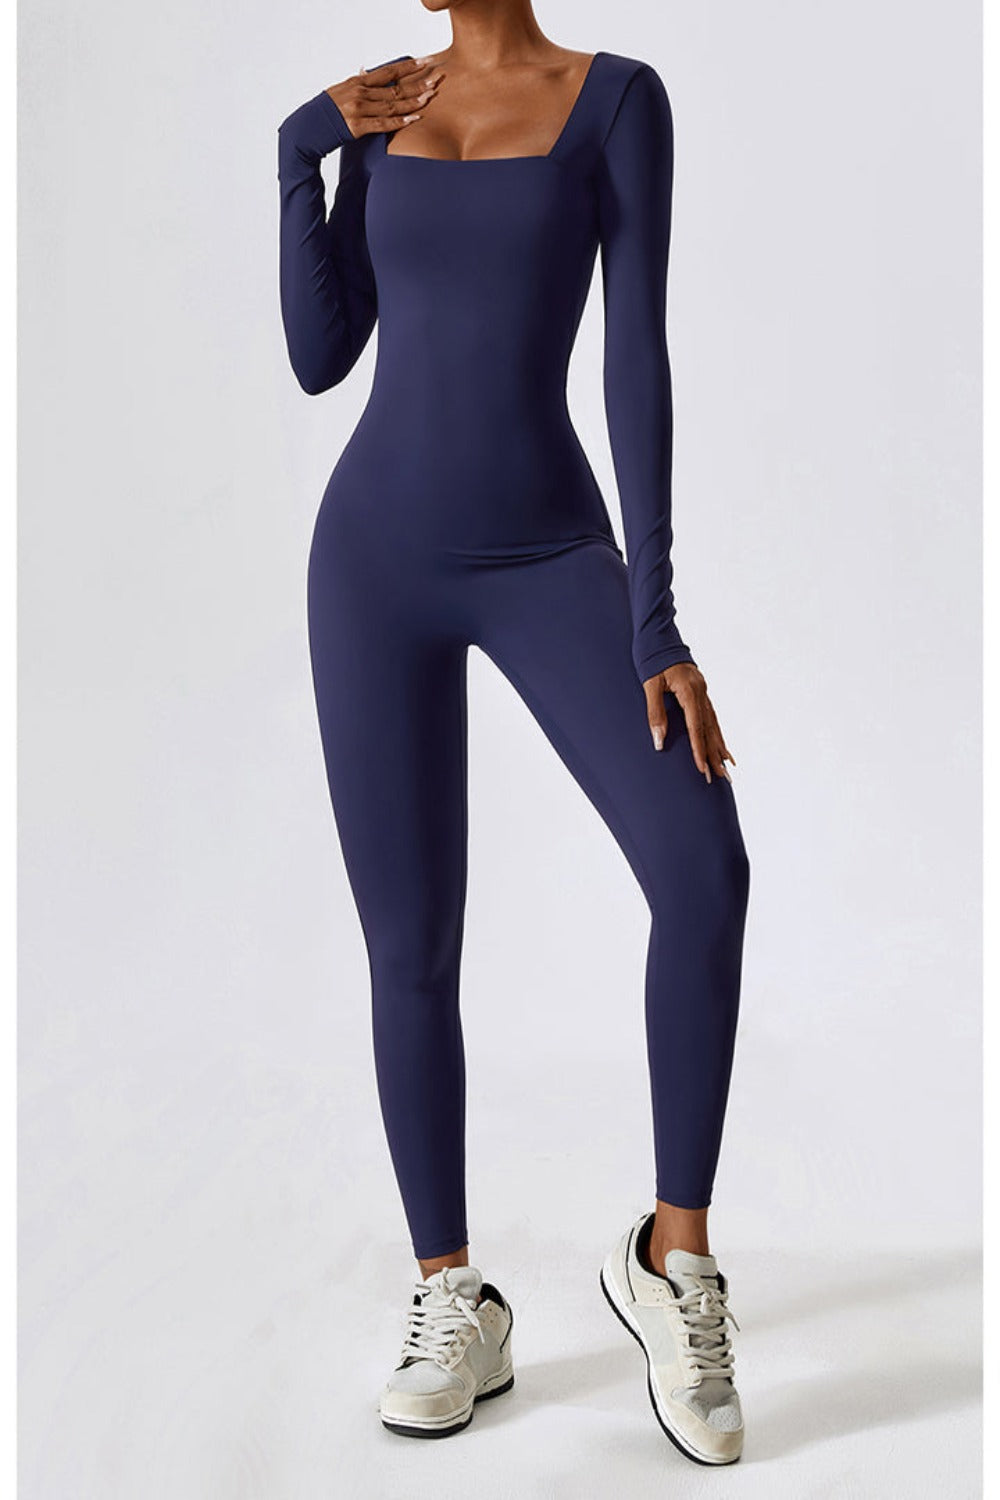 Square Neck Long Sleeve Sports Jumpsuit | Hassle Free Cart